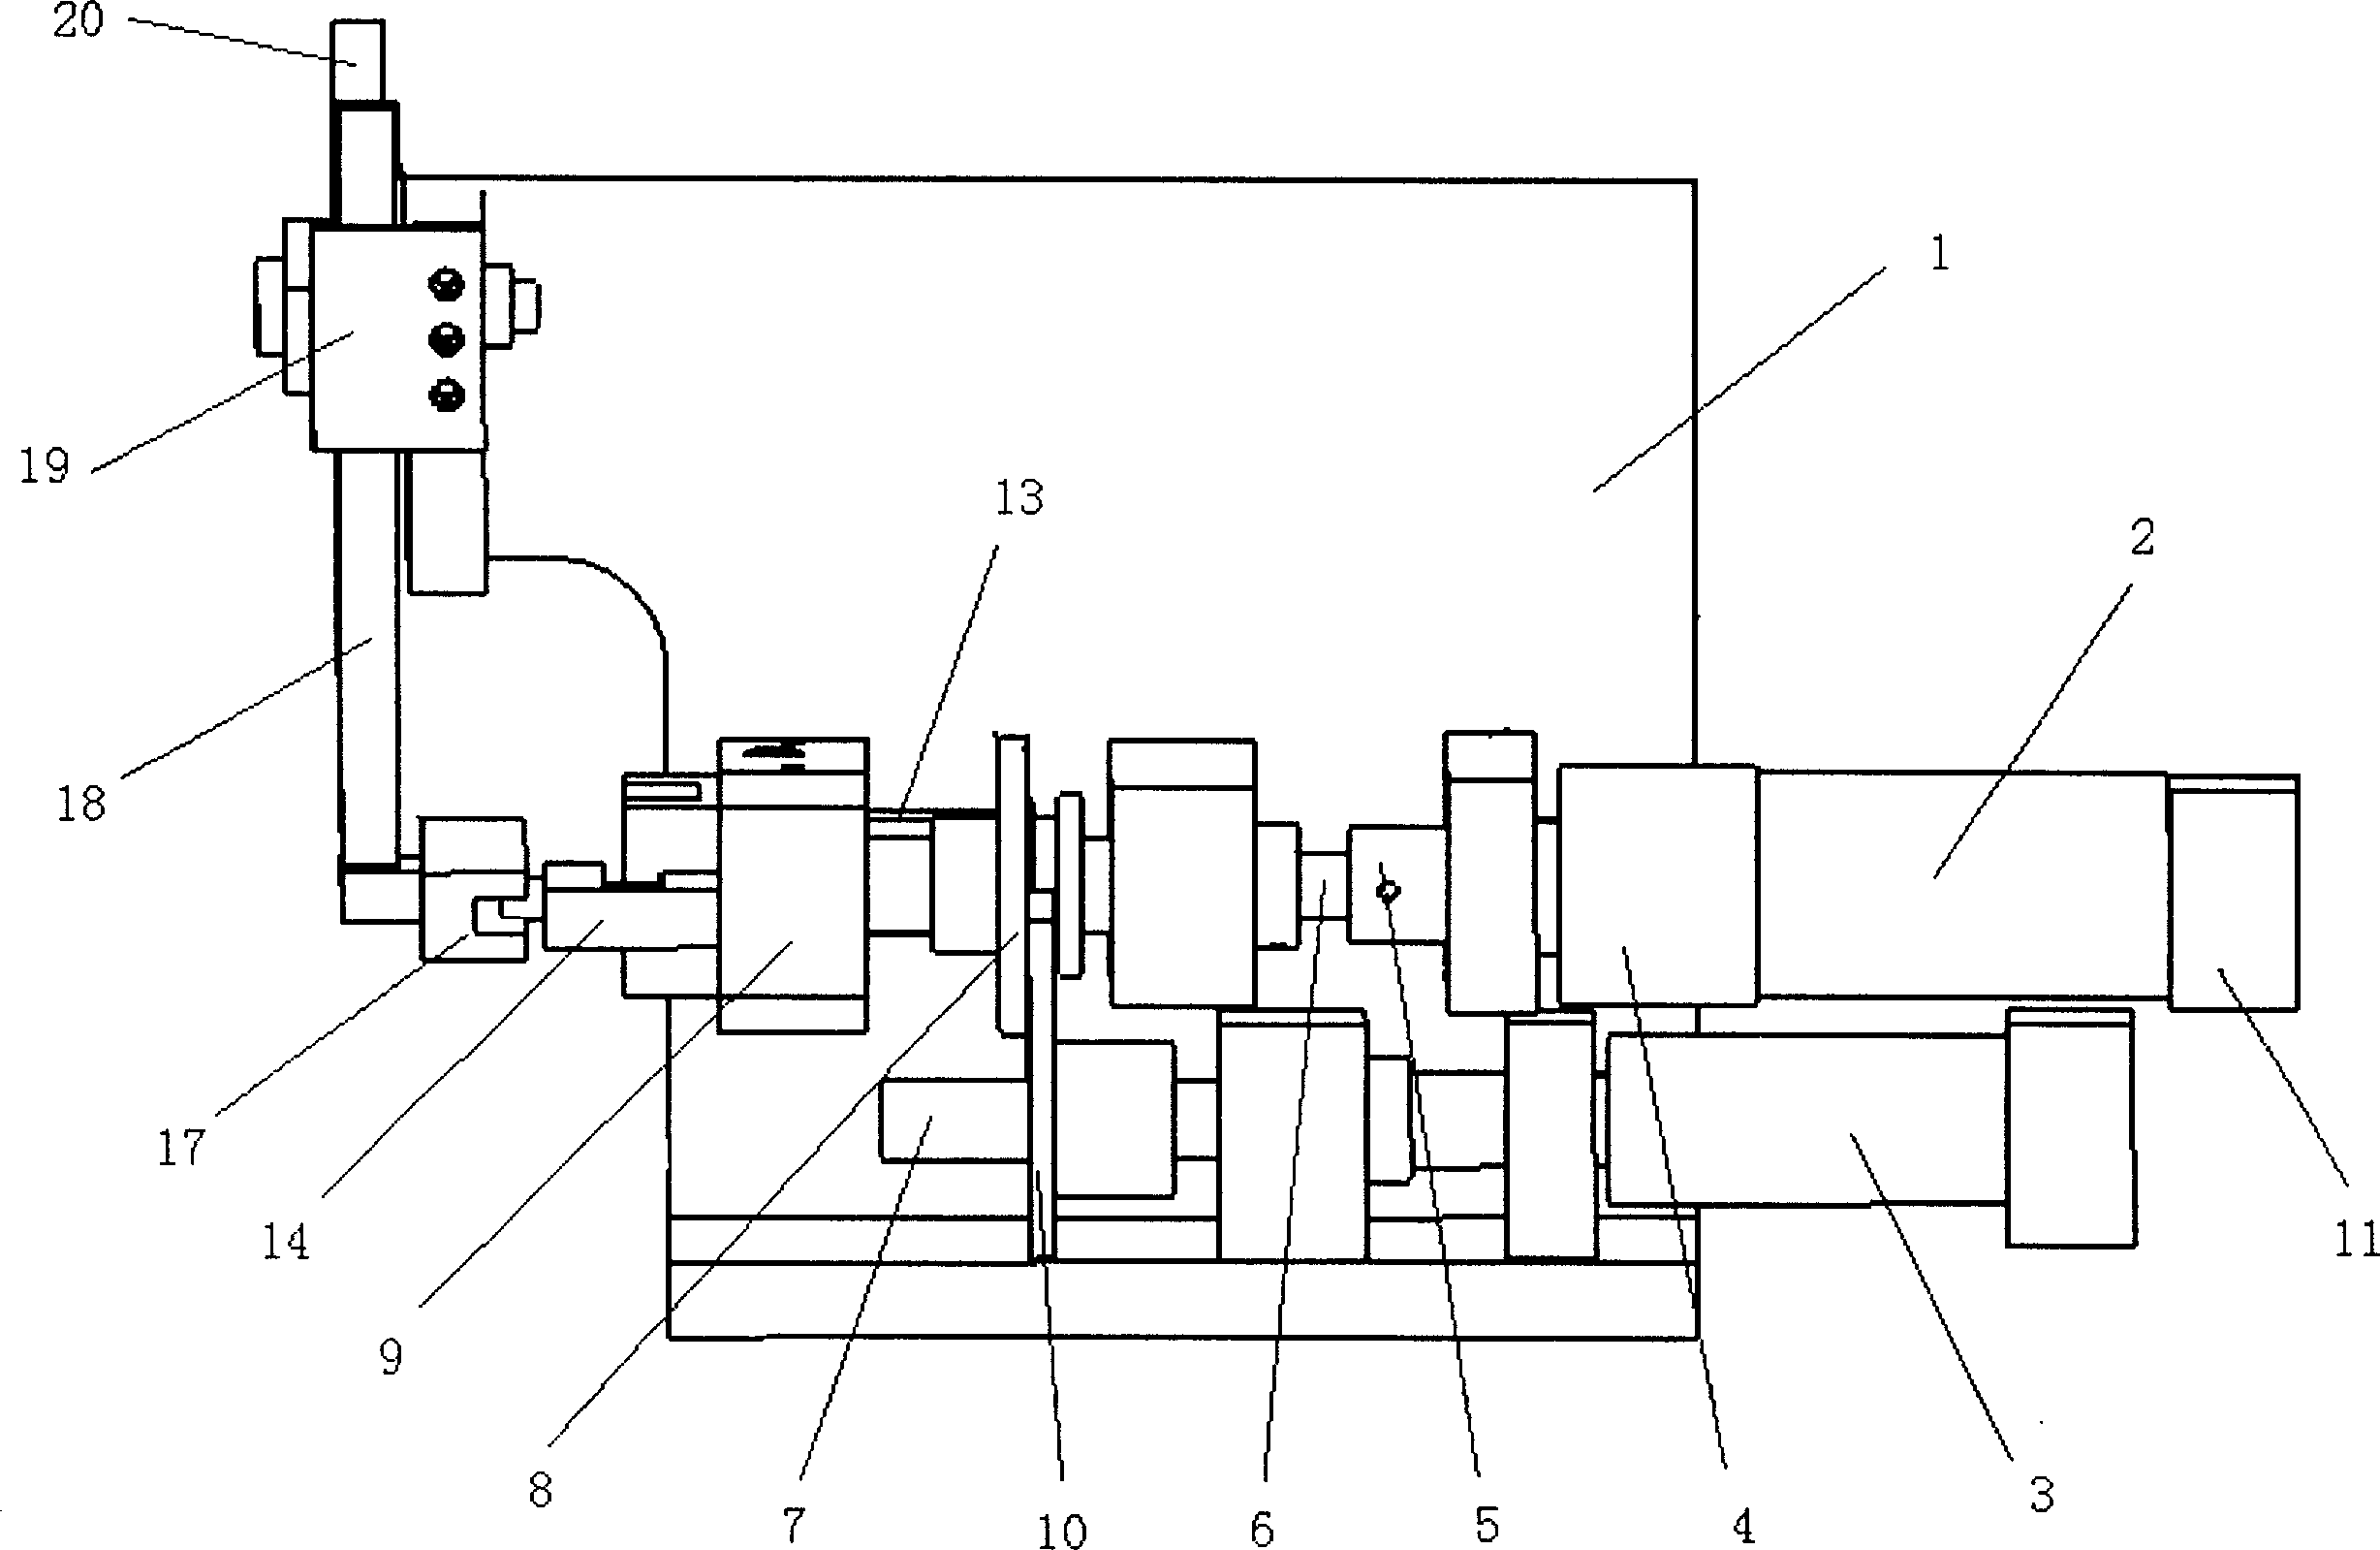 Sine driving mechanism with adjustable amplitude of oscillation for mechanical dolphin